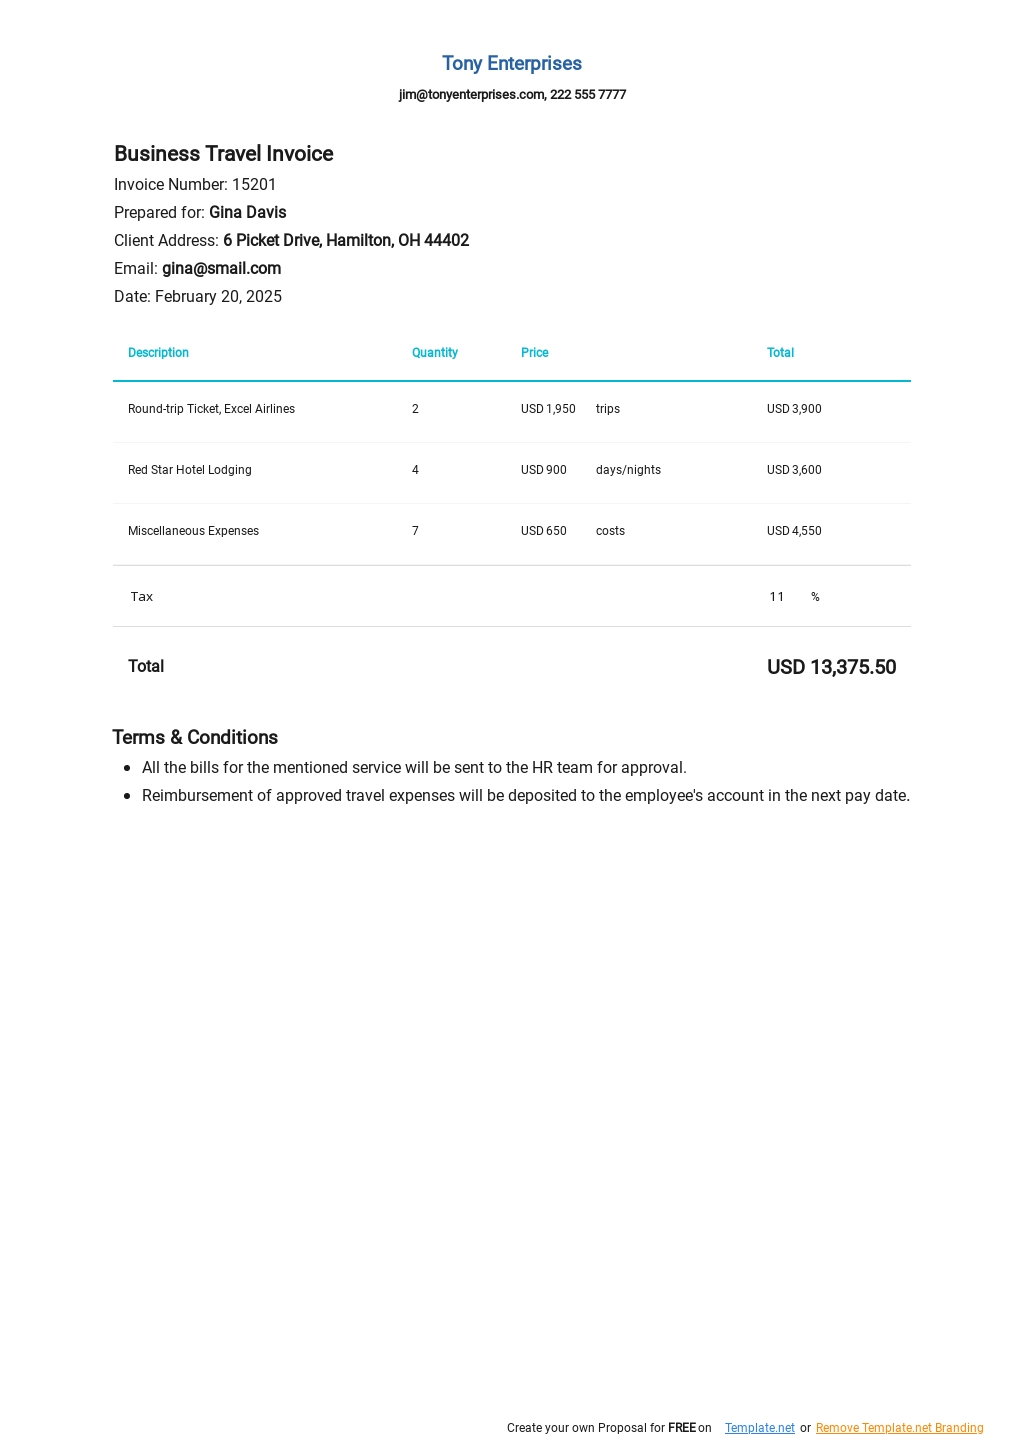 Business Travel Invoice Template.jpe